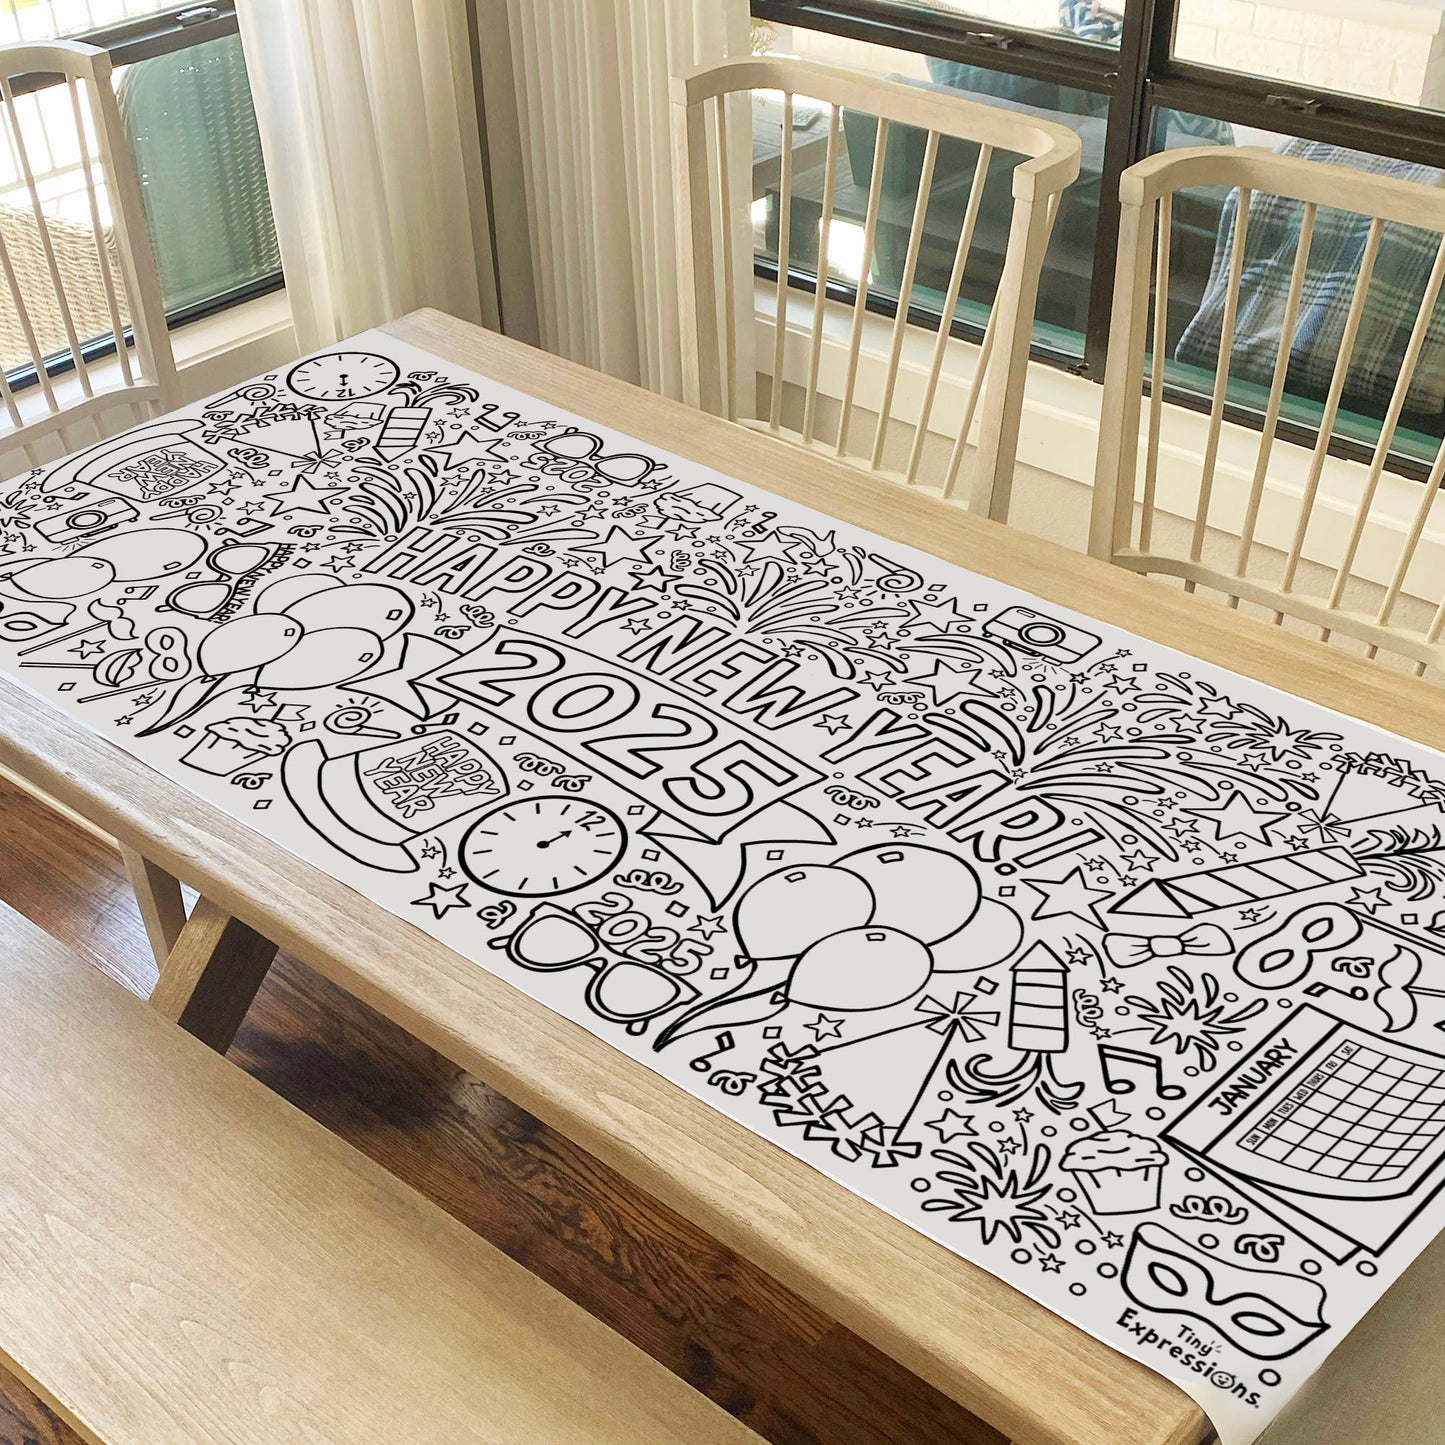 Giant New Years Coloring Banner